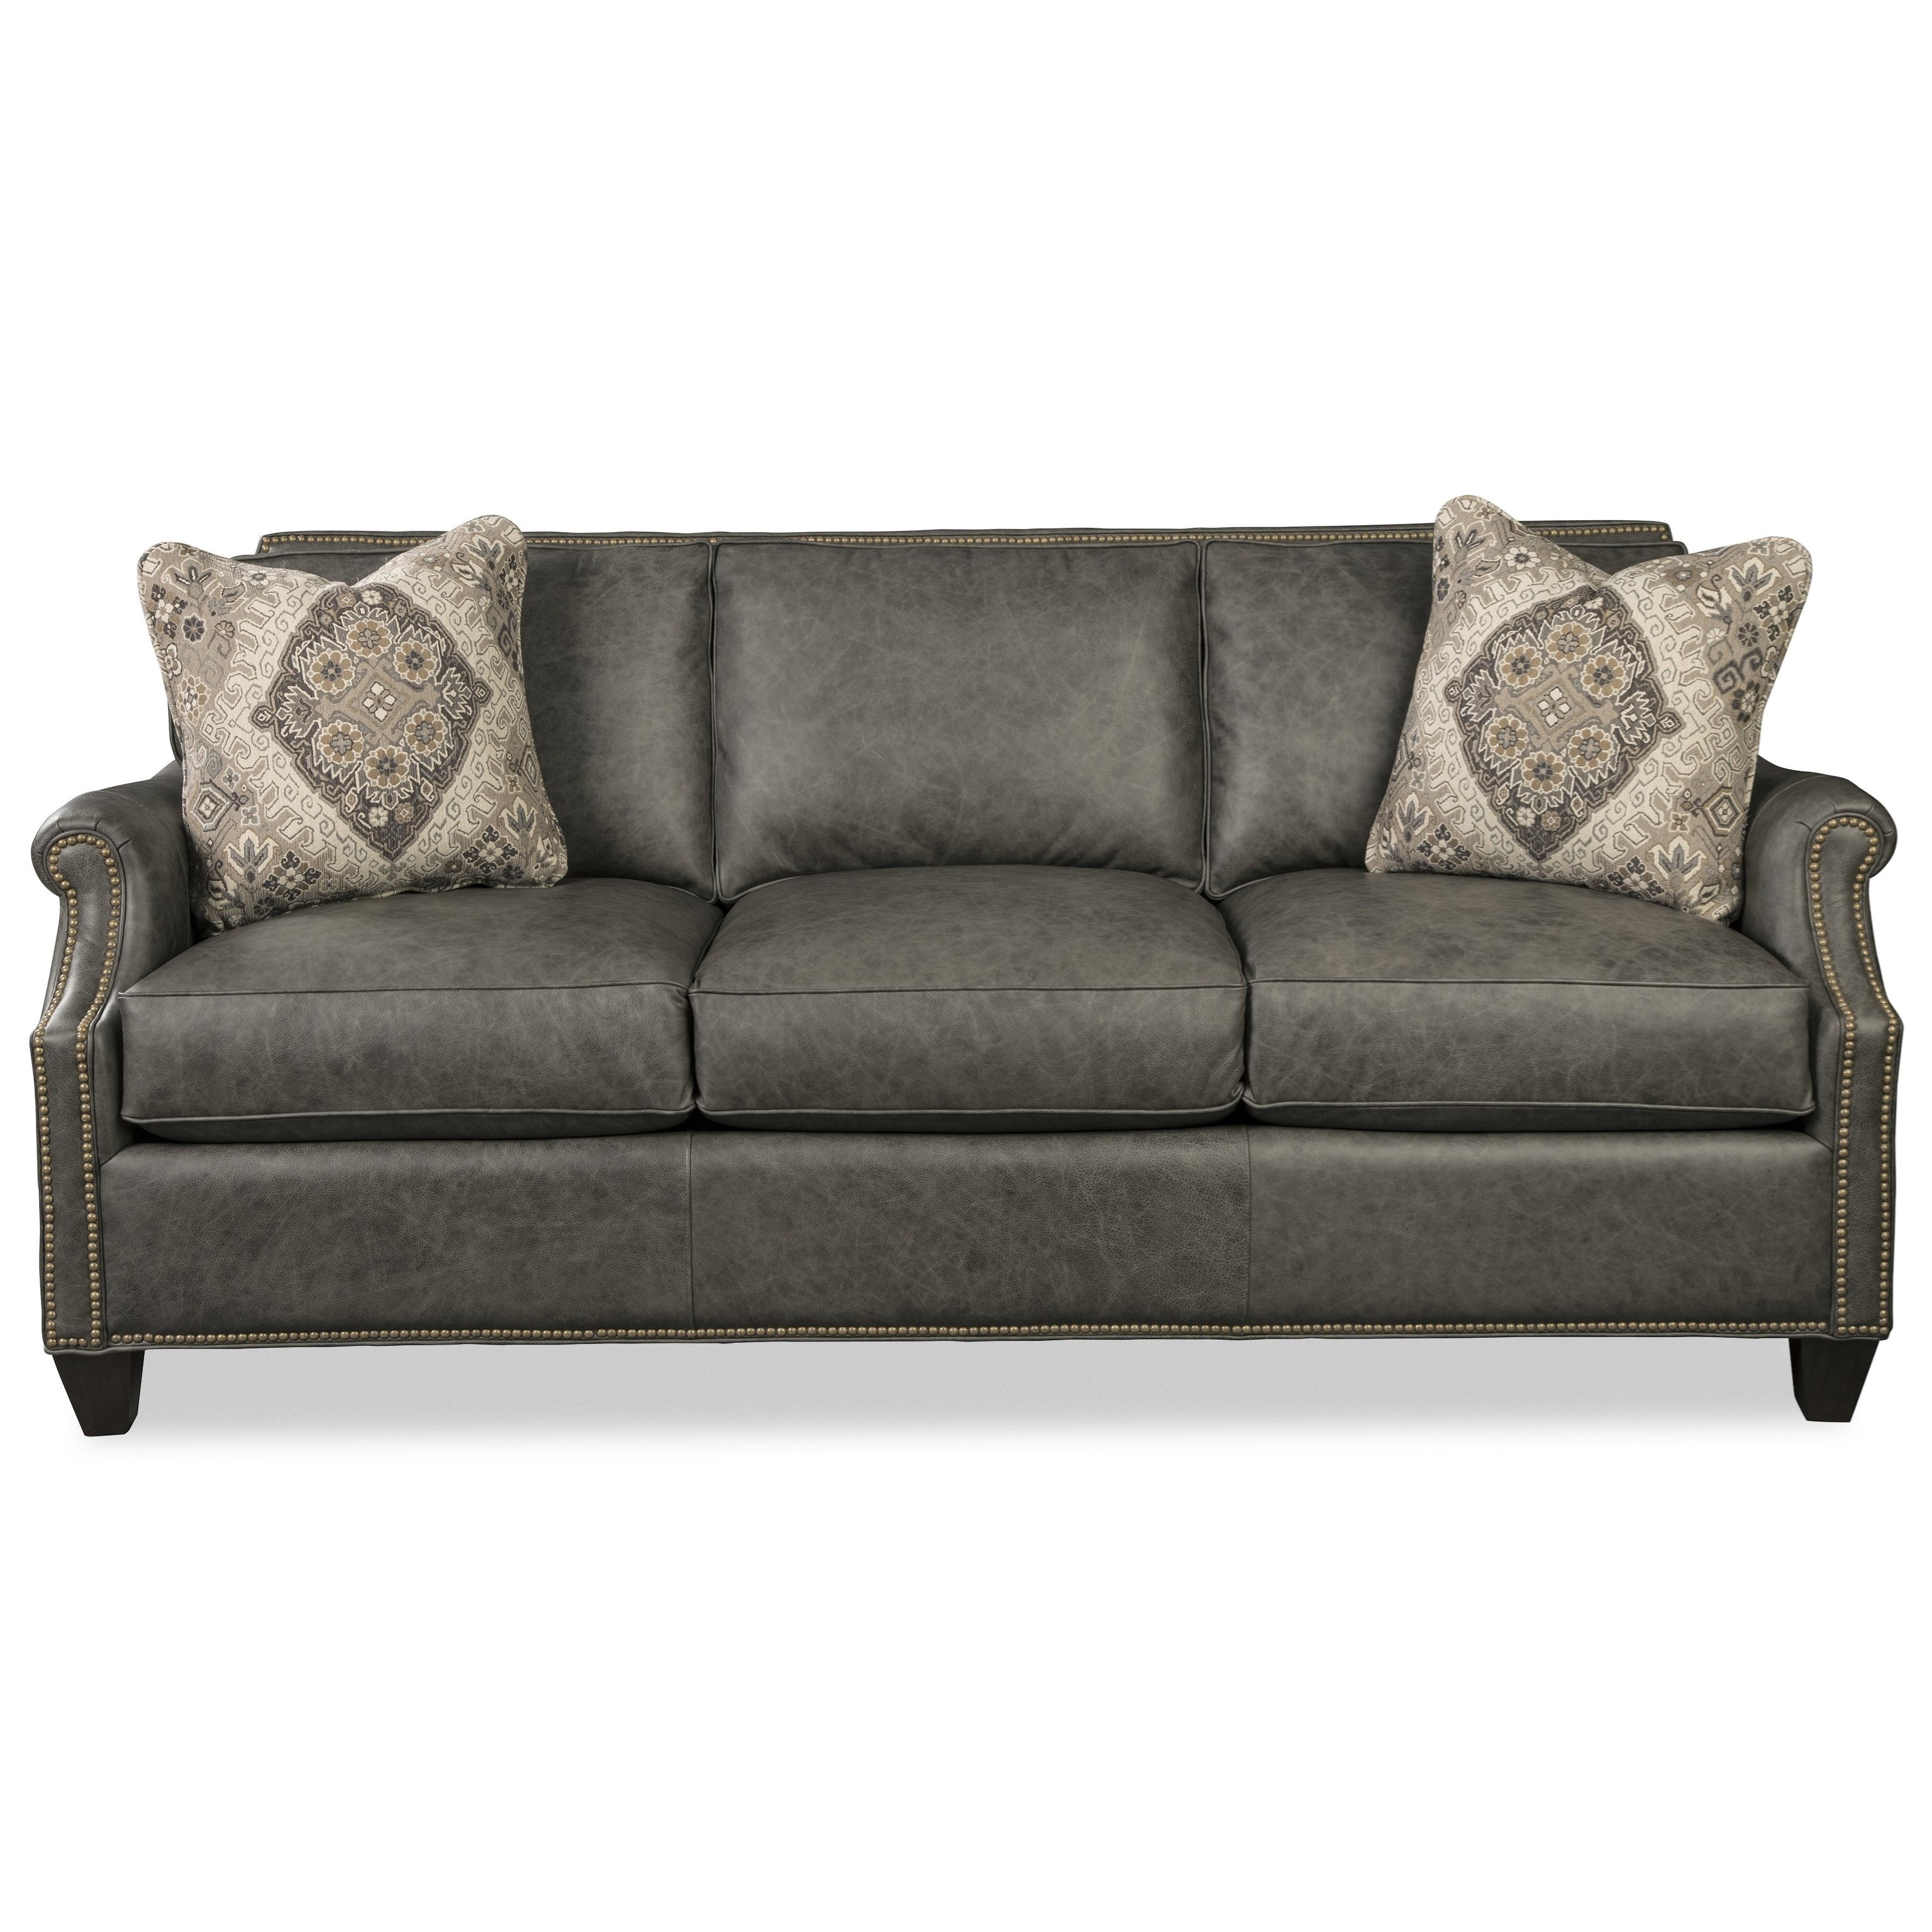 Transitional Leather Sofa with Clipped Corners, Nailheads, Pillows